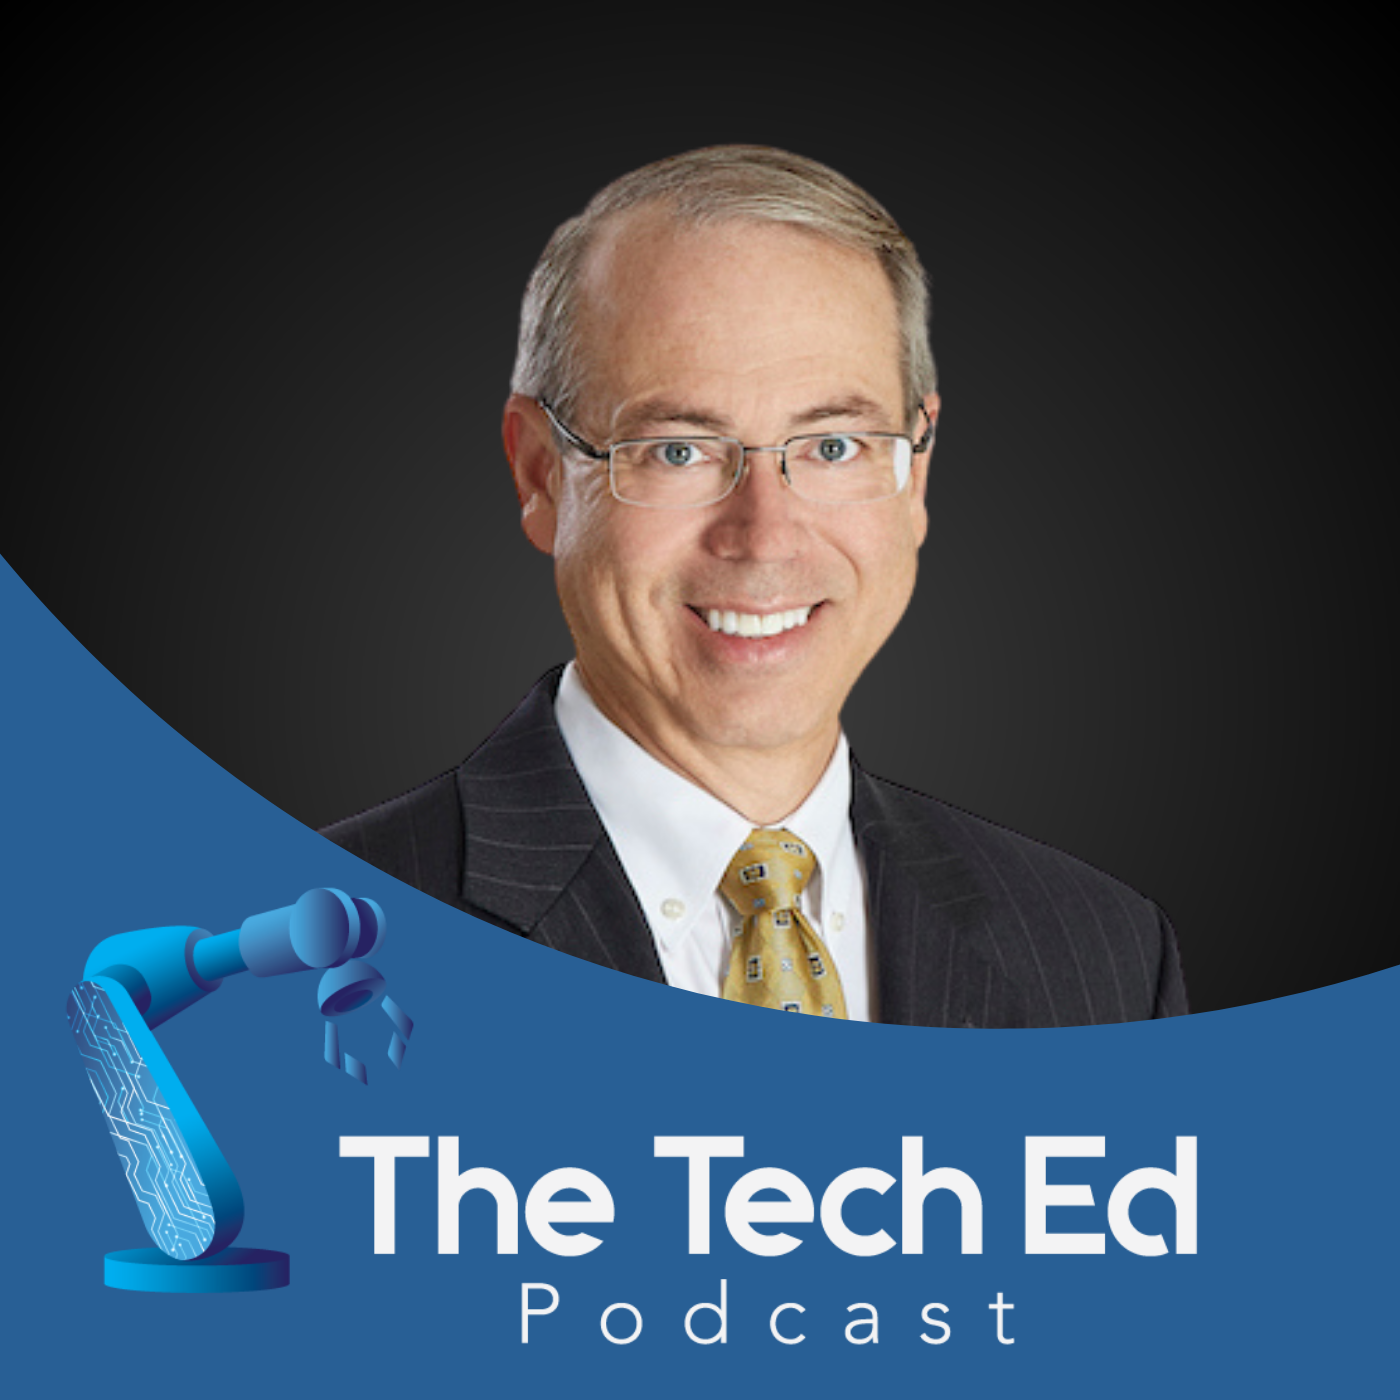 Paul Perkins on The TechEd Podcast